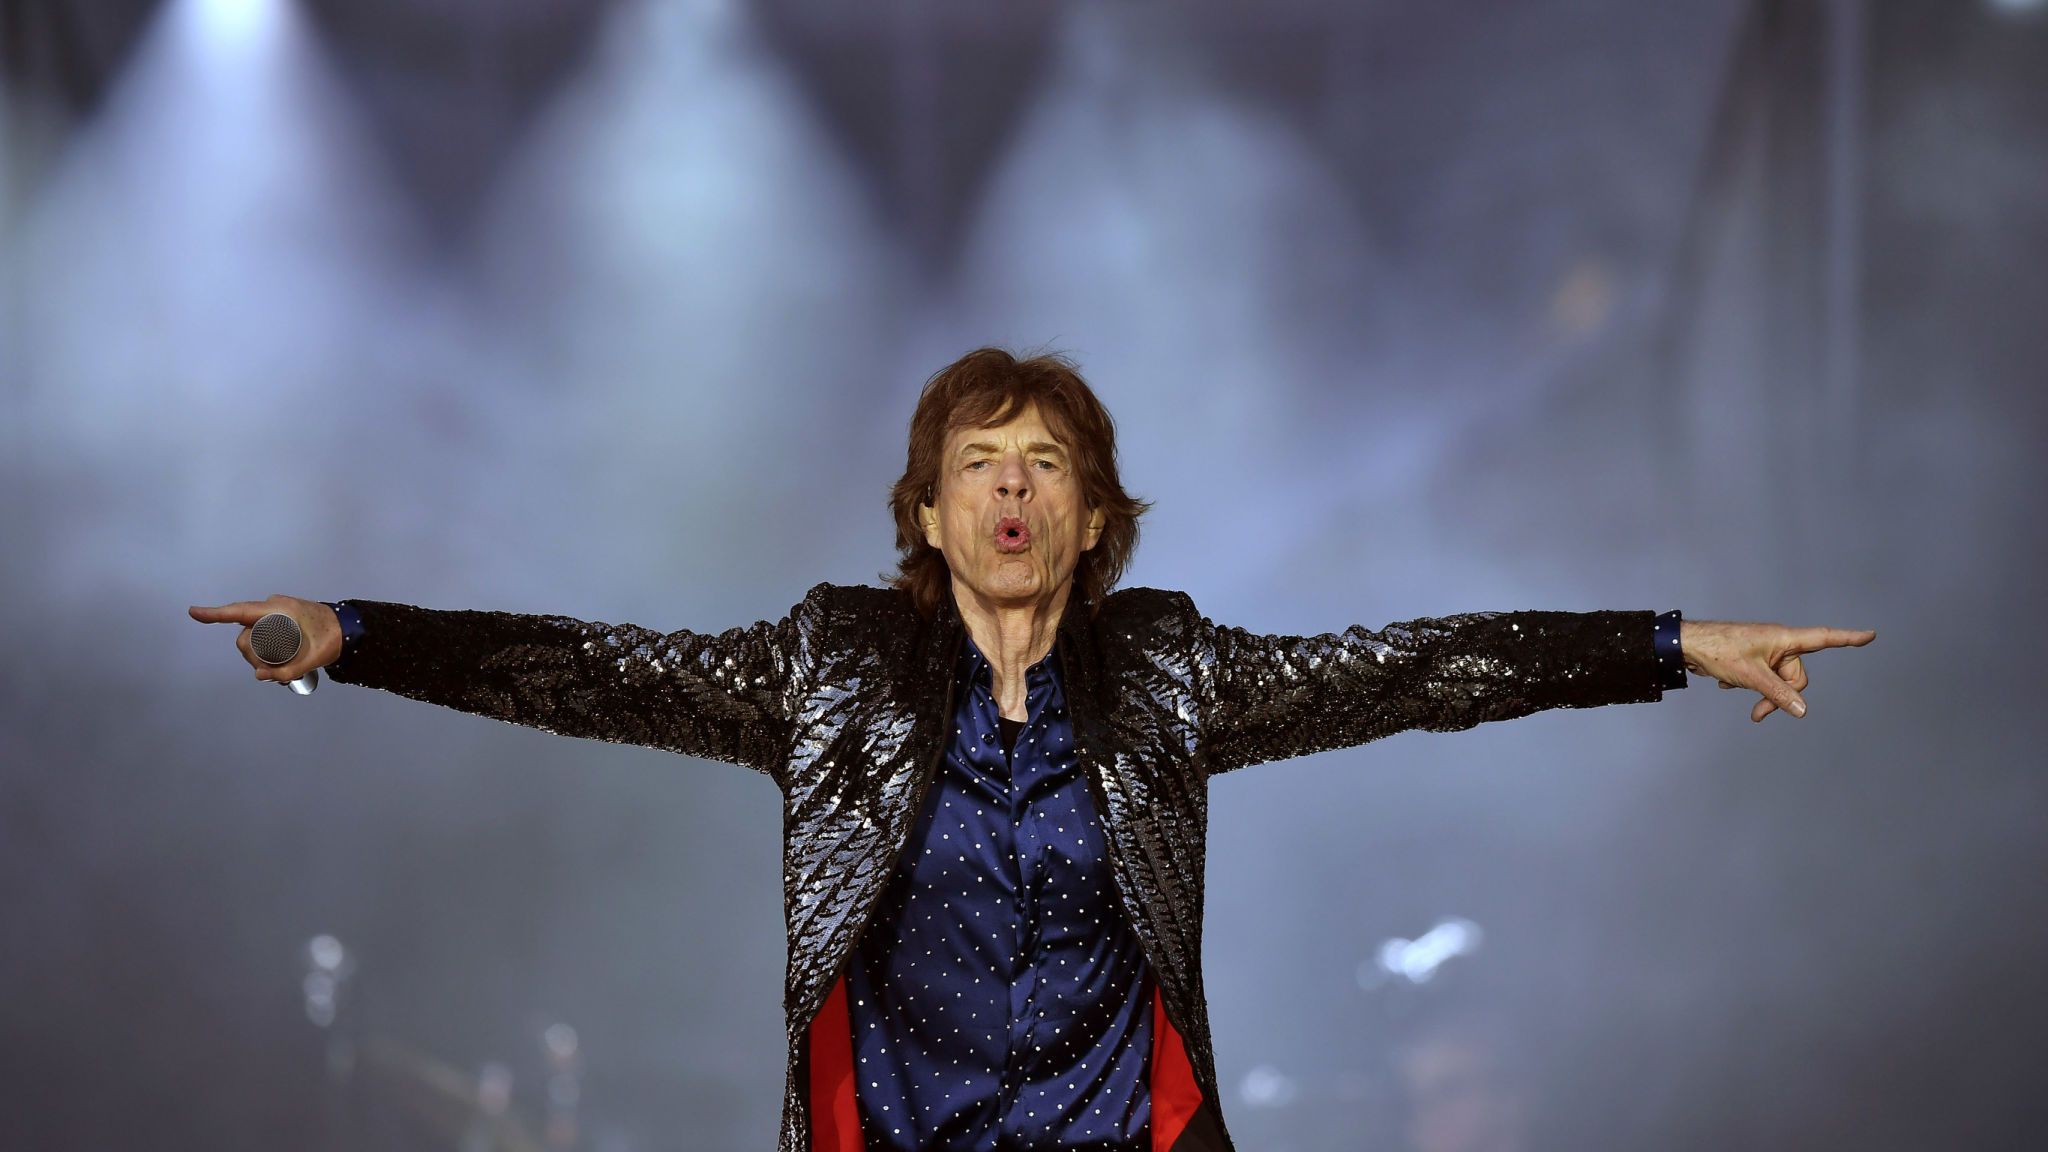 Mick Jagger Of The Rolling Stones Performs Live On - Mick Jagger Live 2019 - HD Wallpaper 